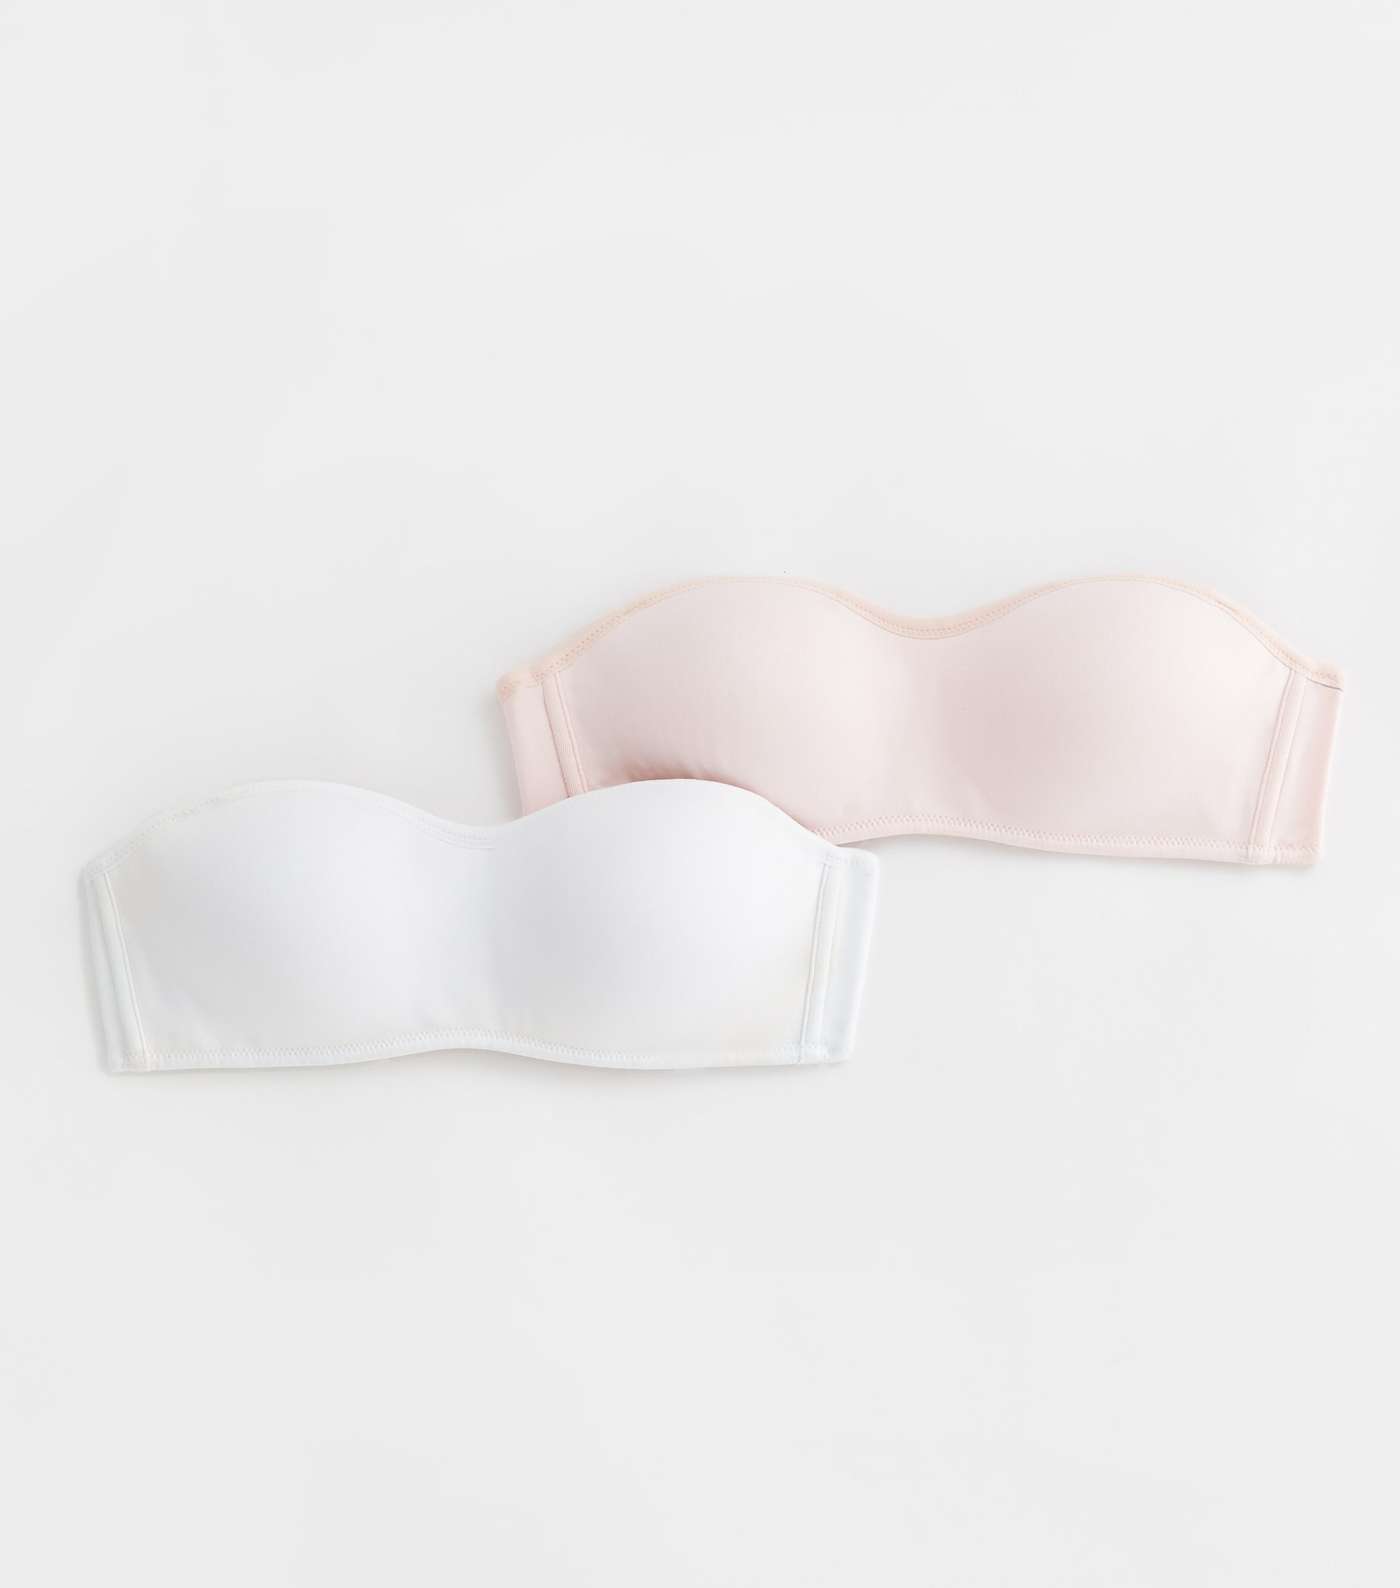 Girls 2 Pack White and Pink Multiway Strapless Bras Image 2